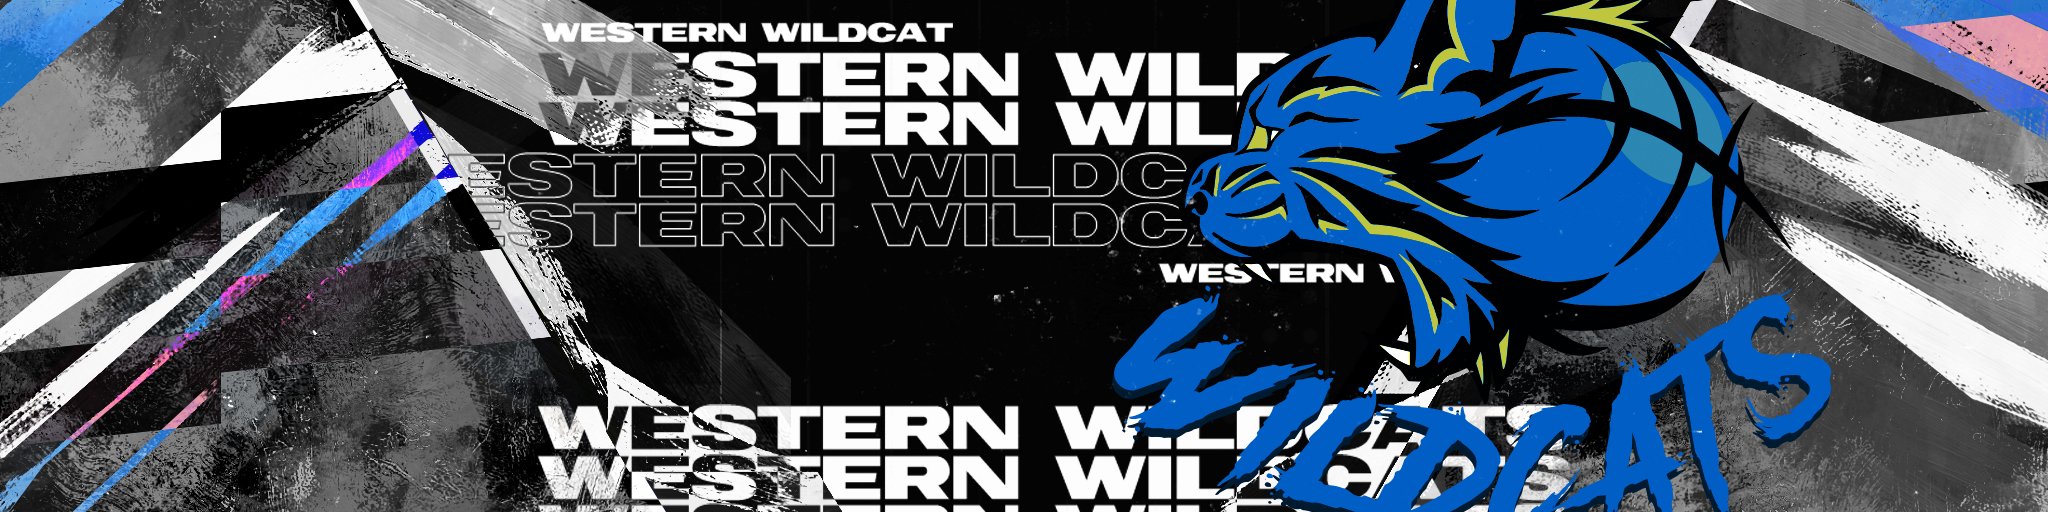 t_player_panel_westernwildcats